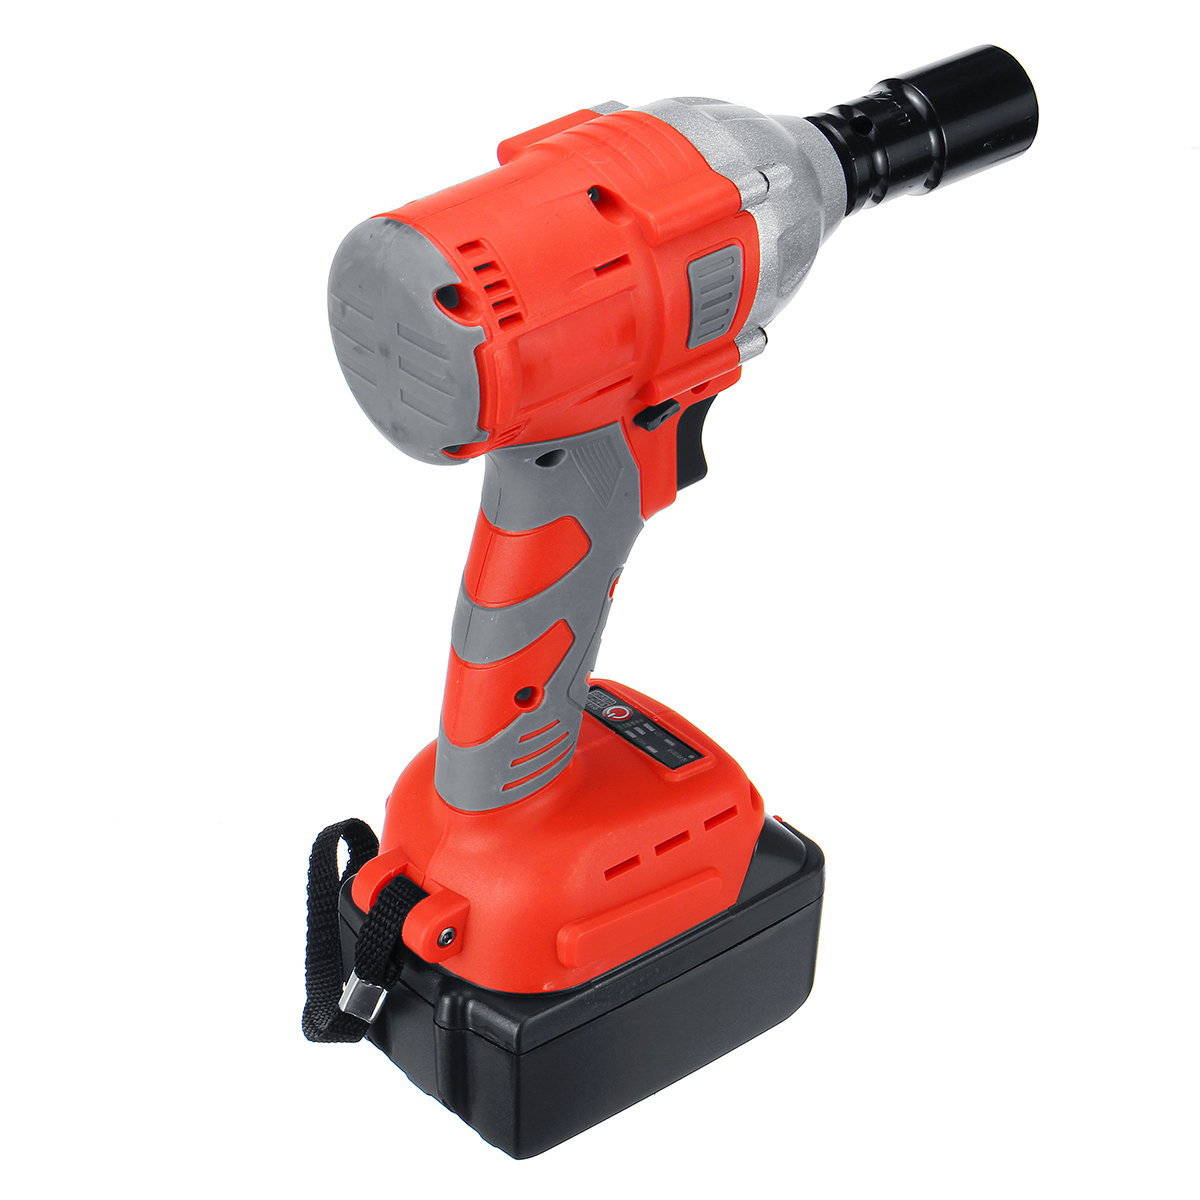 128VF188VF-Cordless-Rechargable-Brushless-Electric-Wrench-W-1or-2-Lithium-Battery-1431480-7